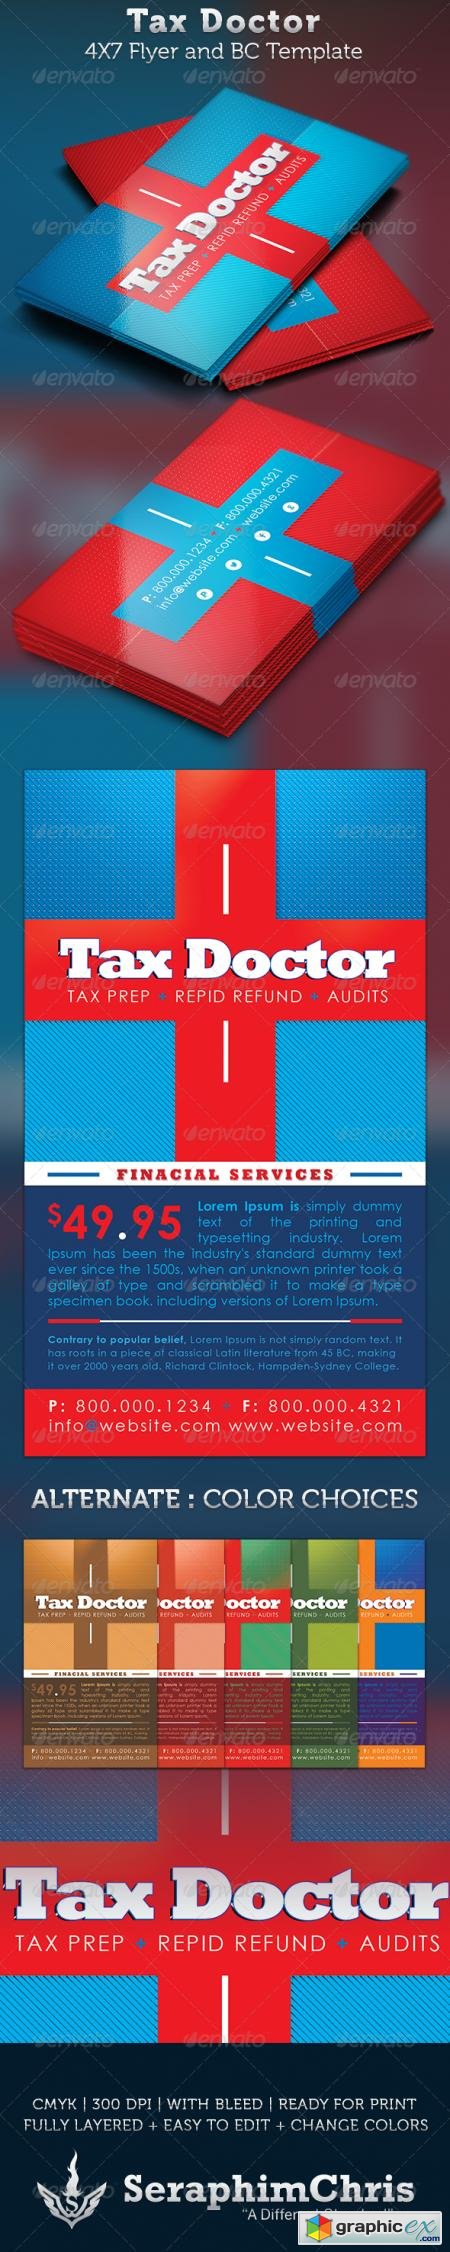 Tax Doctor Business Card and Flyer Template